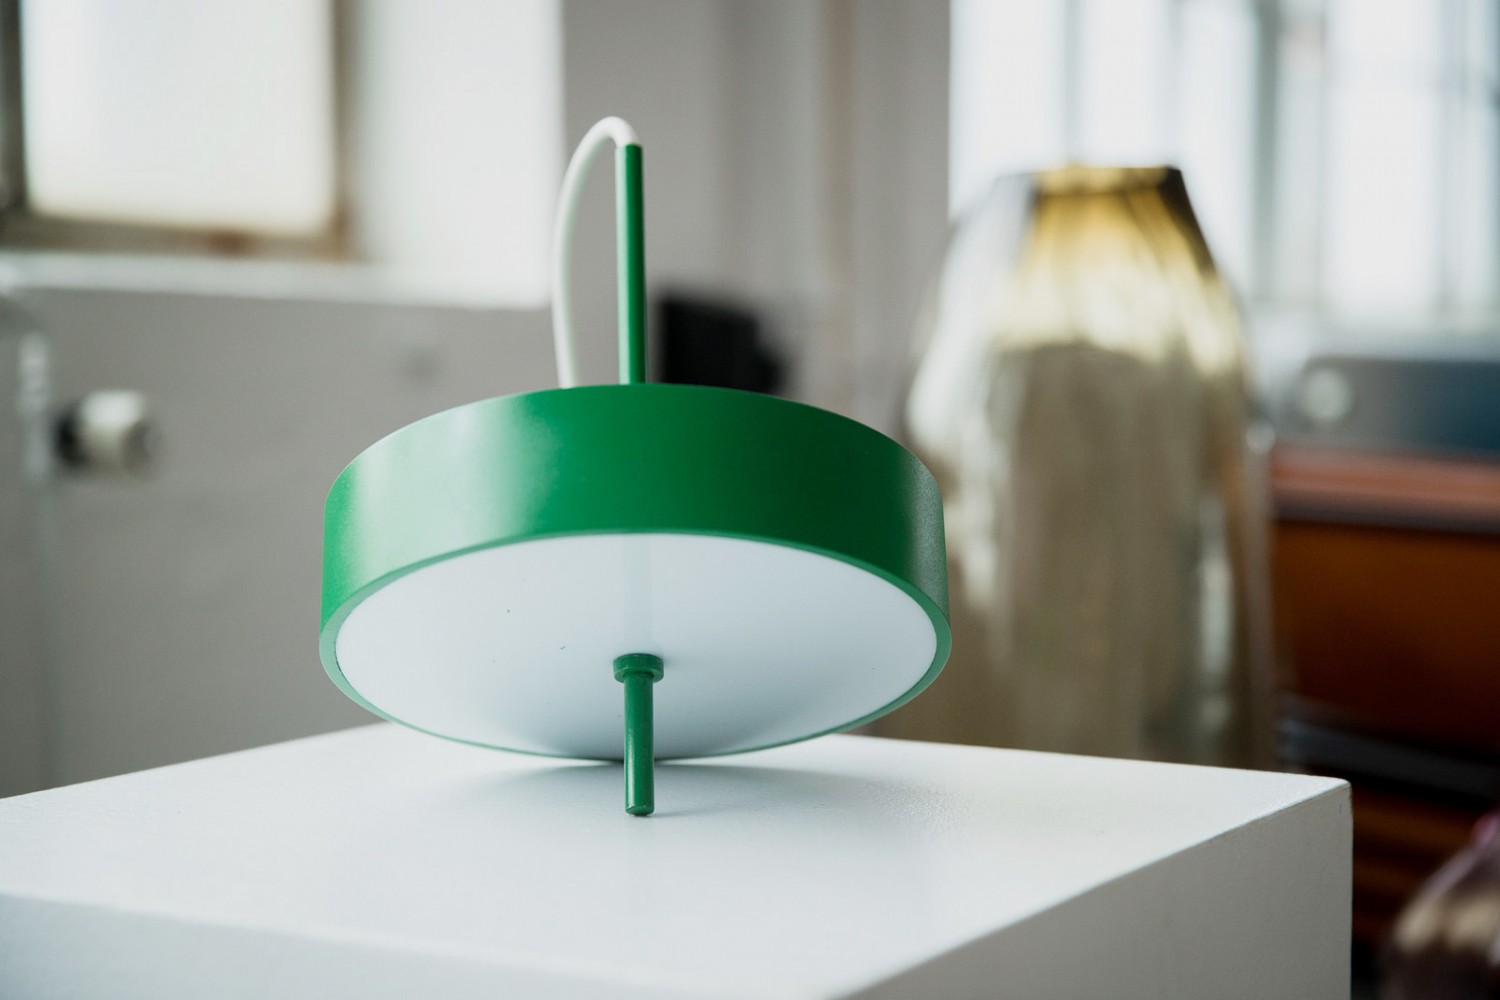 2. prize went to this lamp designed by Andrea Bettina Mueller.